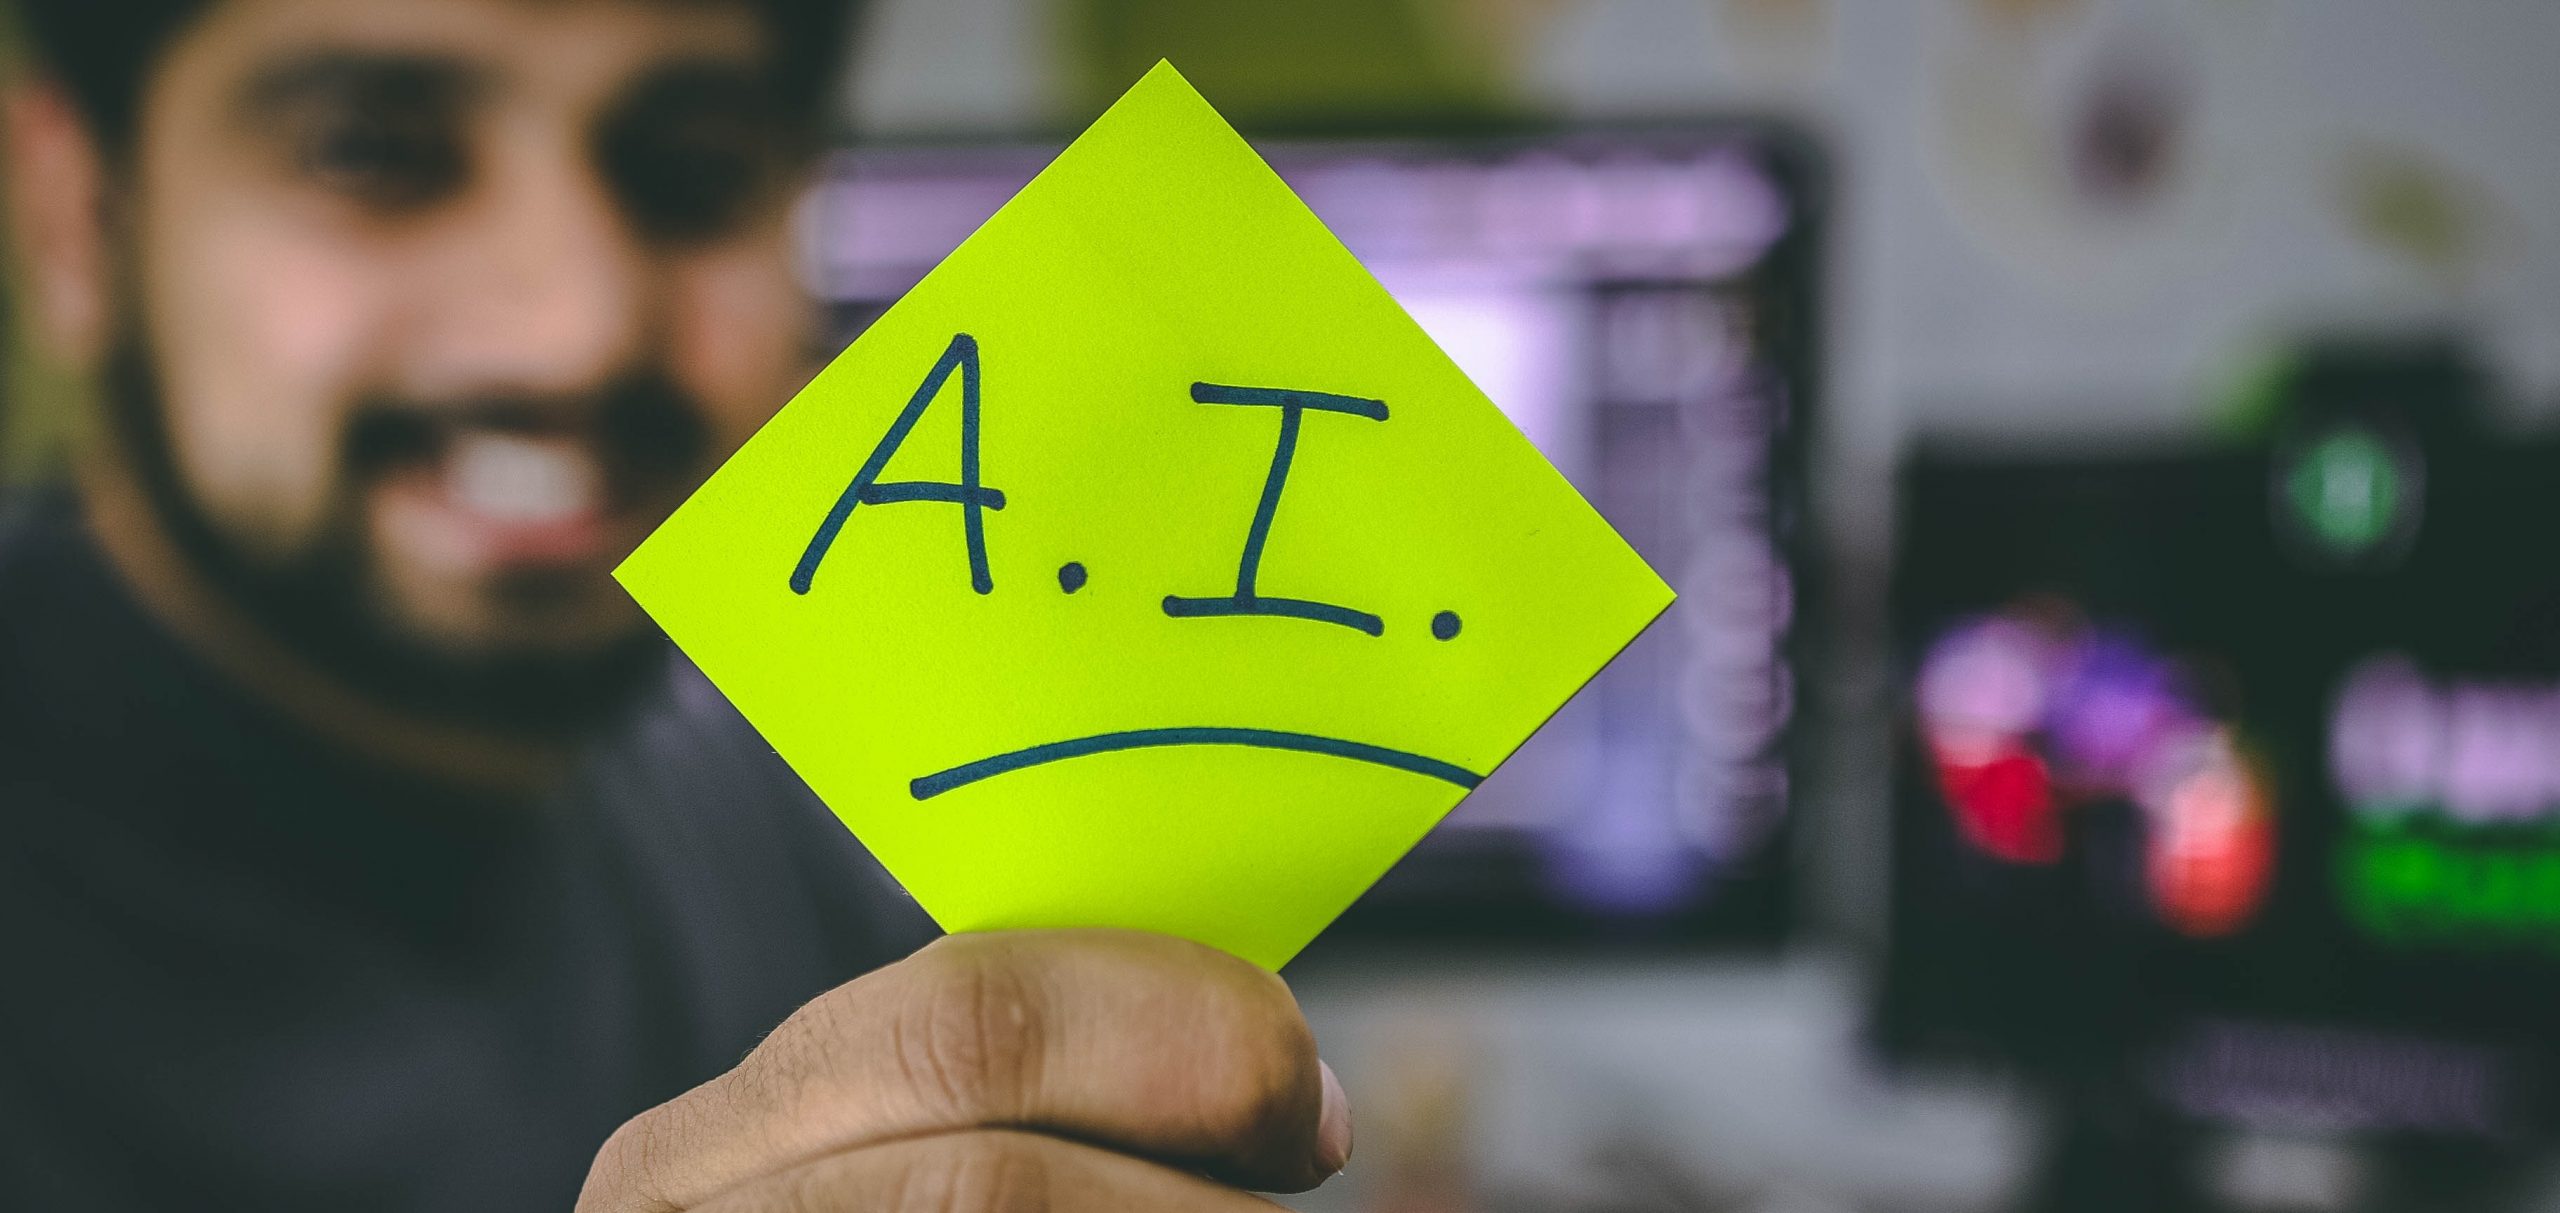 Artifical Intelligence in IT – just another hype or…?